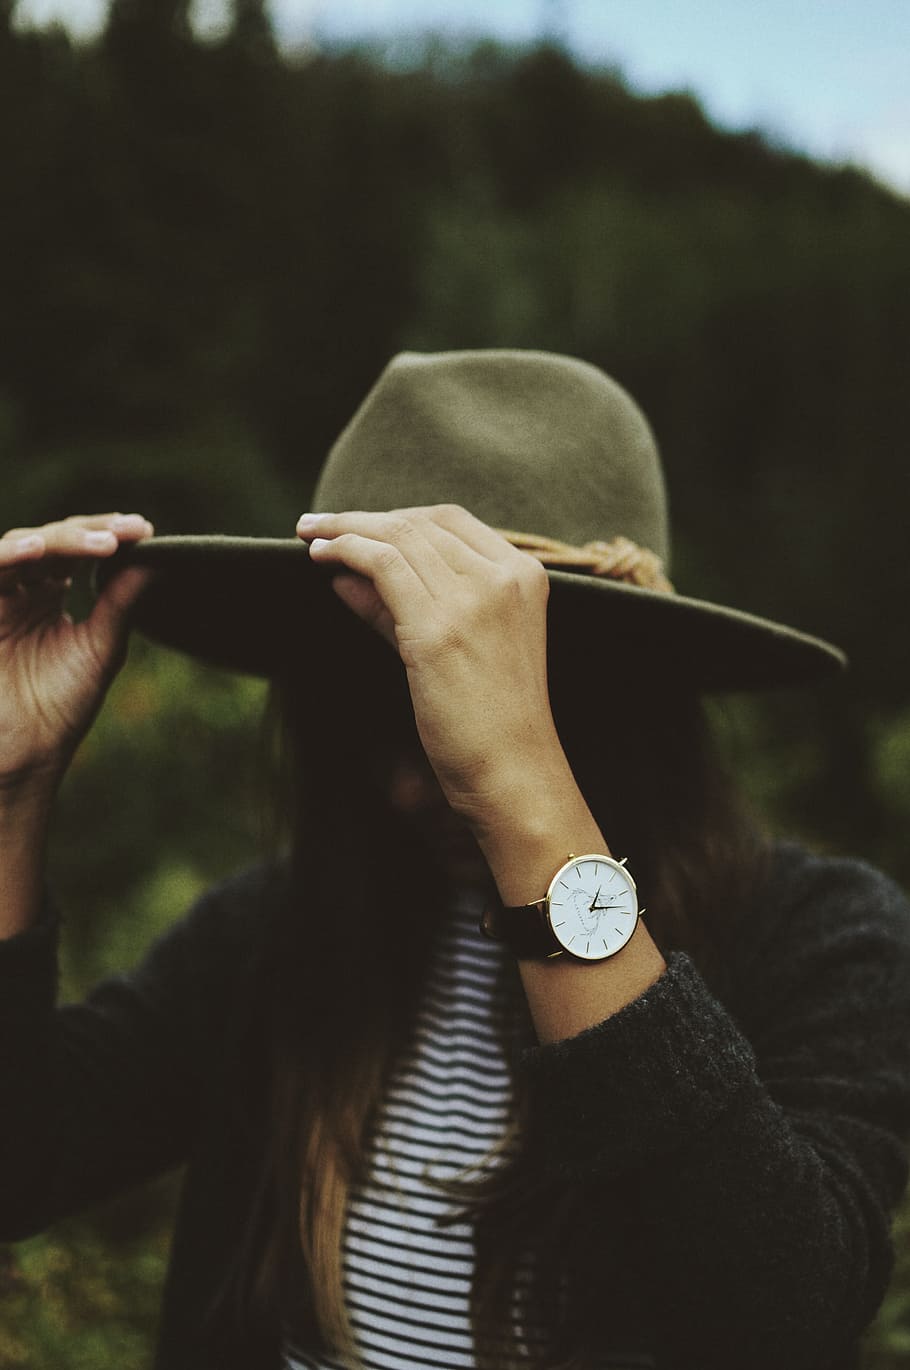 federa, clock, watch, fashion, stripes, green, nature, leaves, trees, people